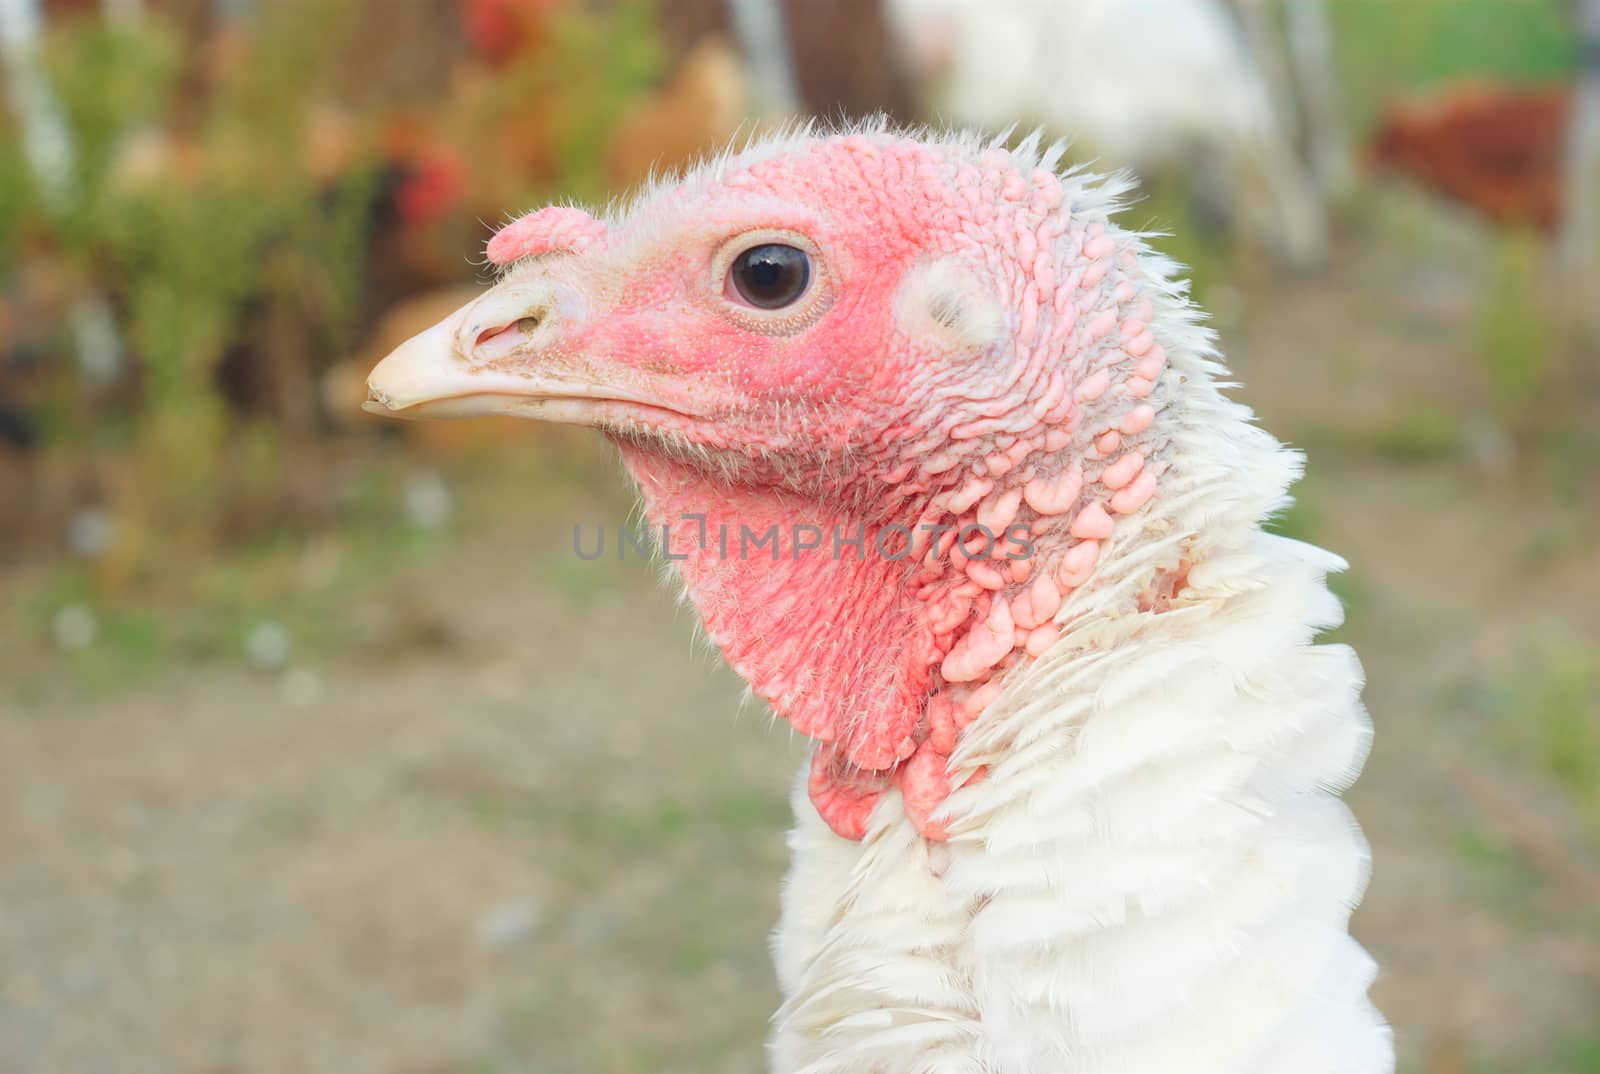 white turkey at the farm profile view outside by jacquesdurocher